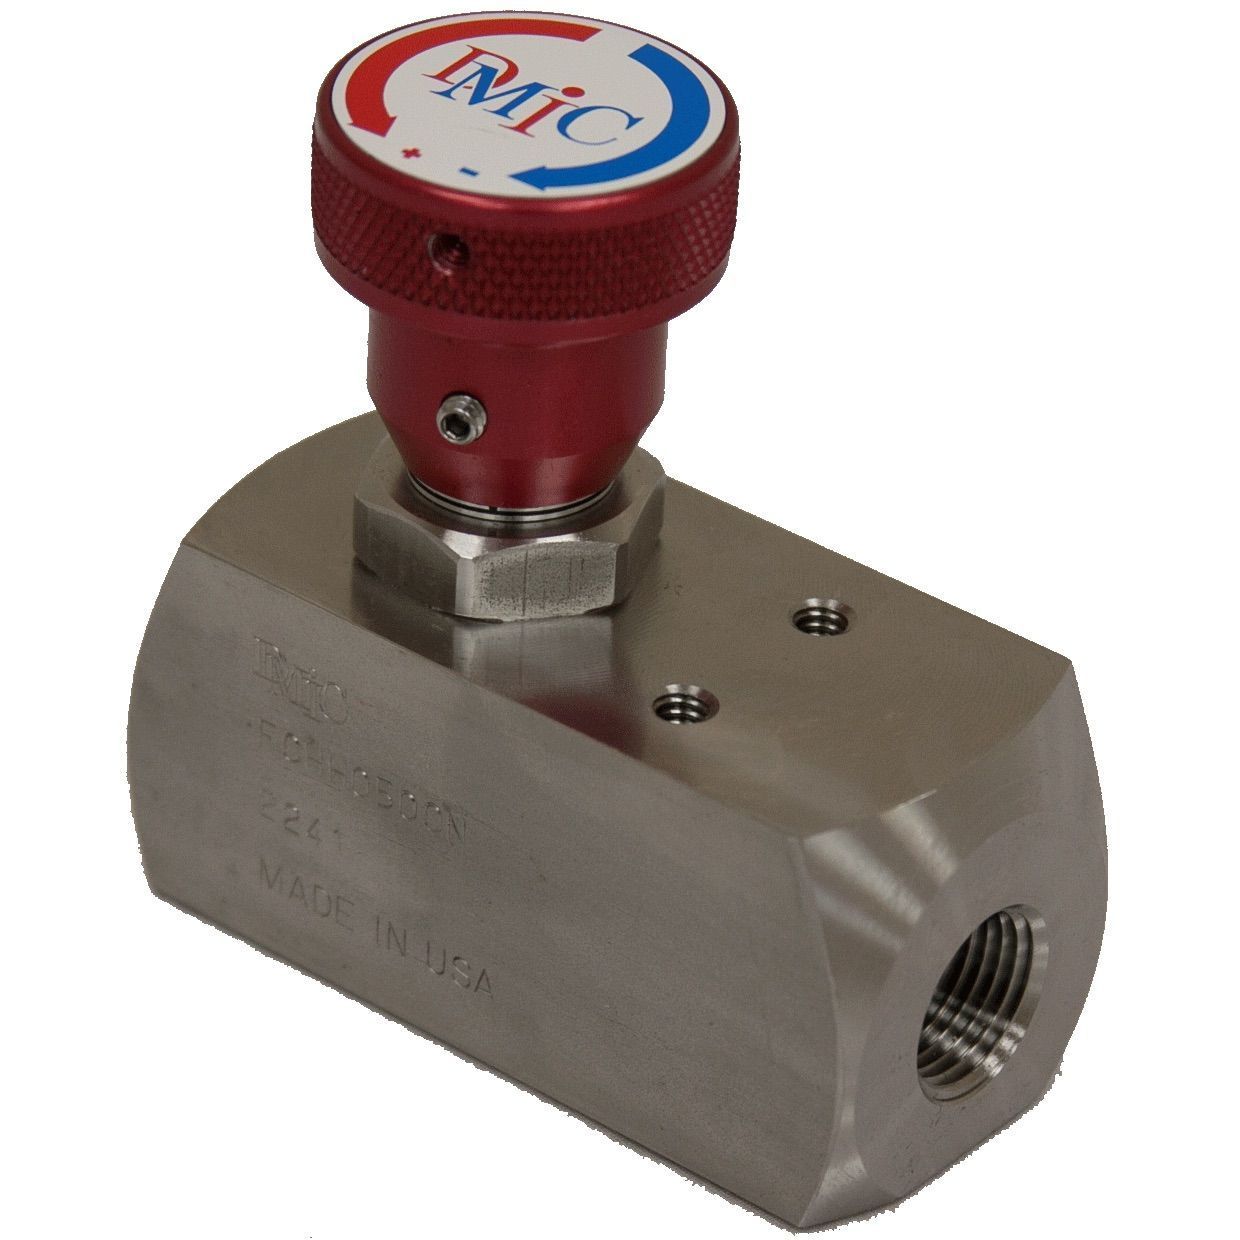 FCHH-1250S-1141 : DMIC Flow Control, Unidirectional, with Integrated Check, #20 SAE (1.25"), Carbon Steel, 10000psi